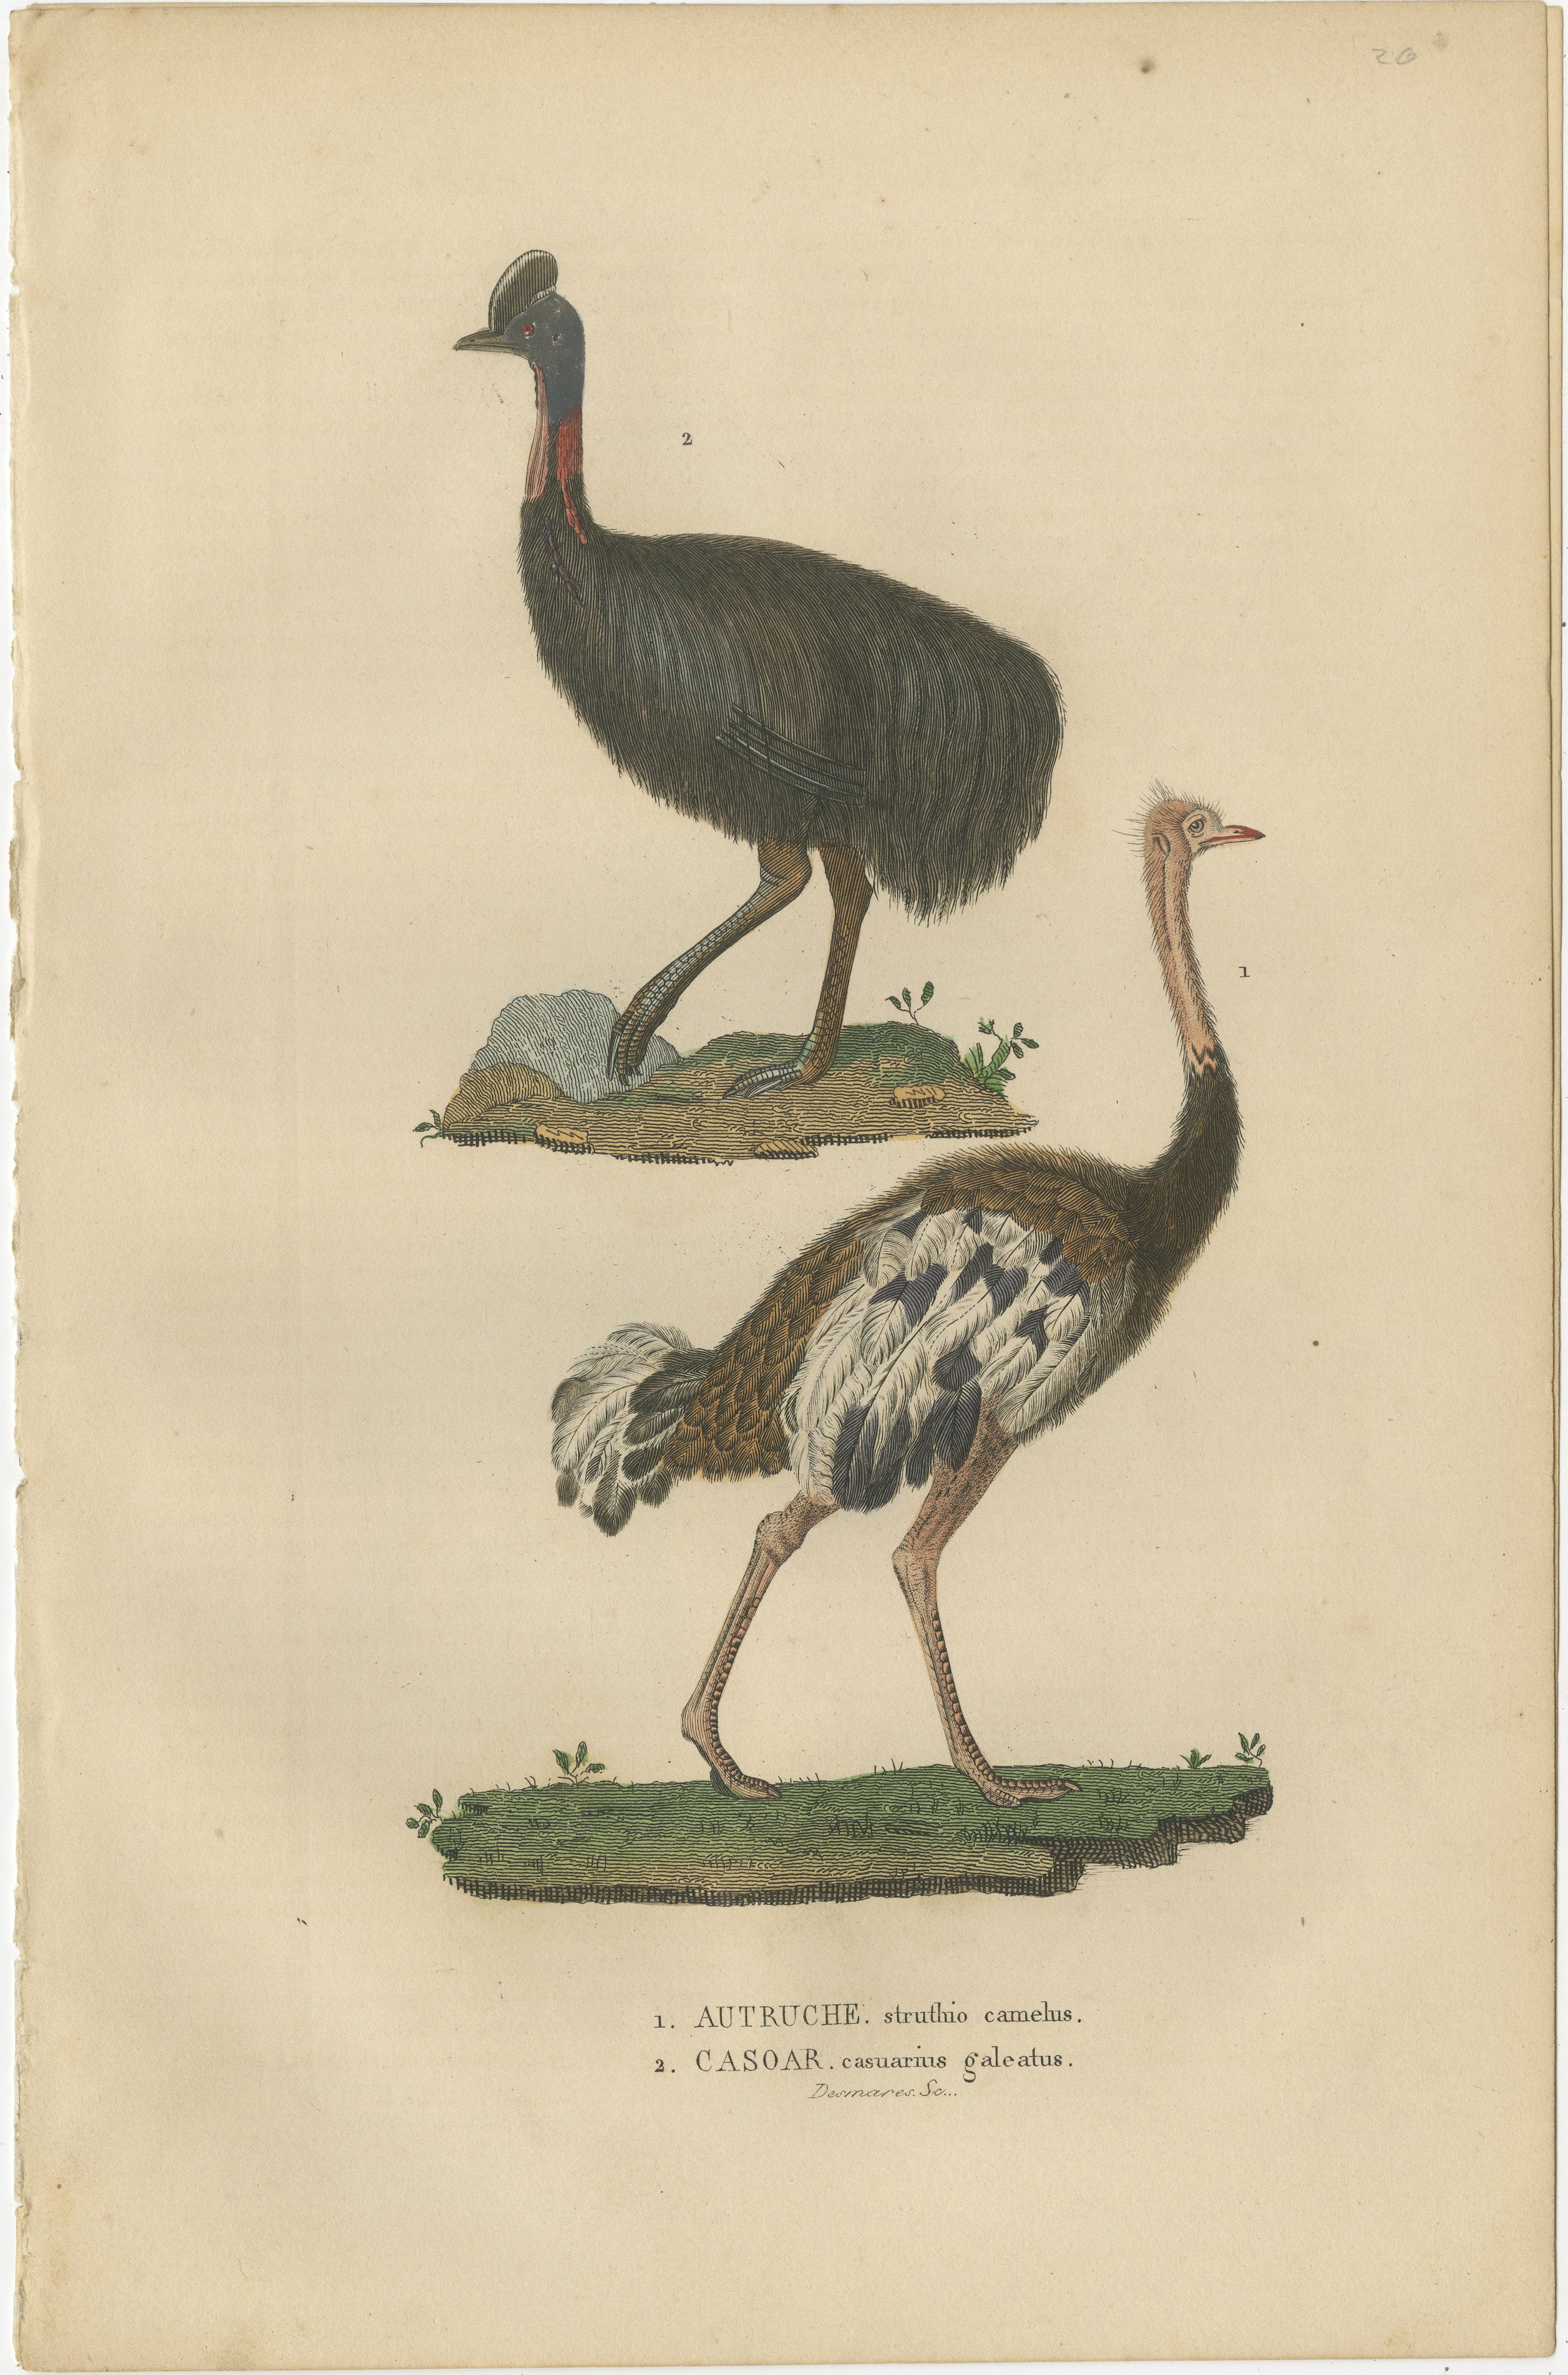 Title: ‘1. STRUTHIO CAMELUS – AUTRUCHE, 2. CASUARIUS GALEATUS – CASOAR.’

Translated: 1. OSTRICH, 2. CASSOWARY.’

Engraving with original hand colouring, heightened with arabic gum on wove (vellin) paper.

More info on the book in which it was